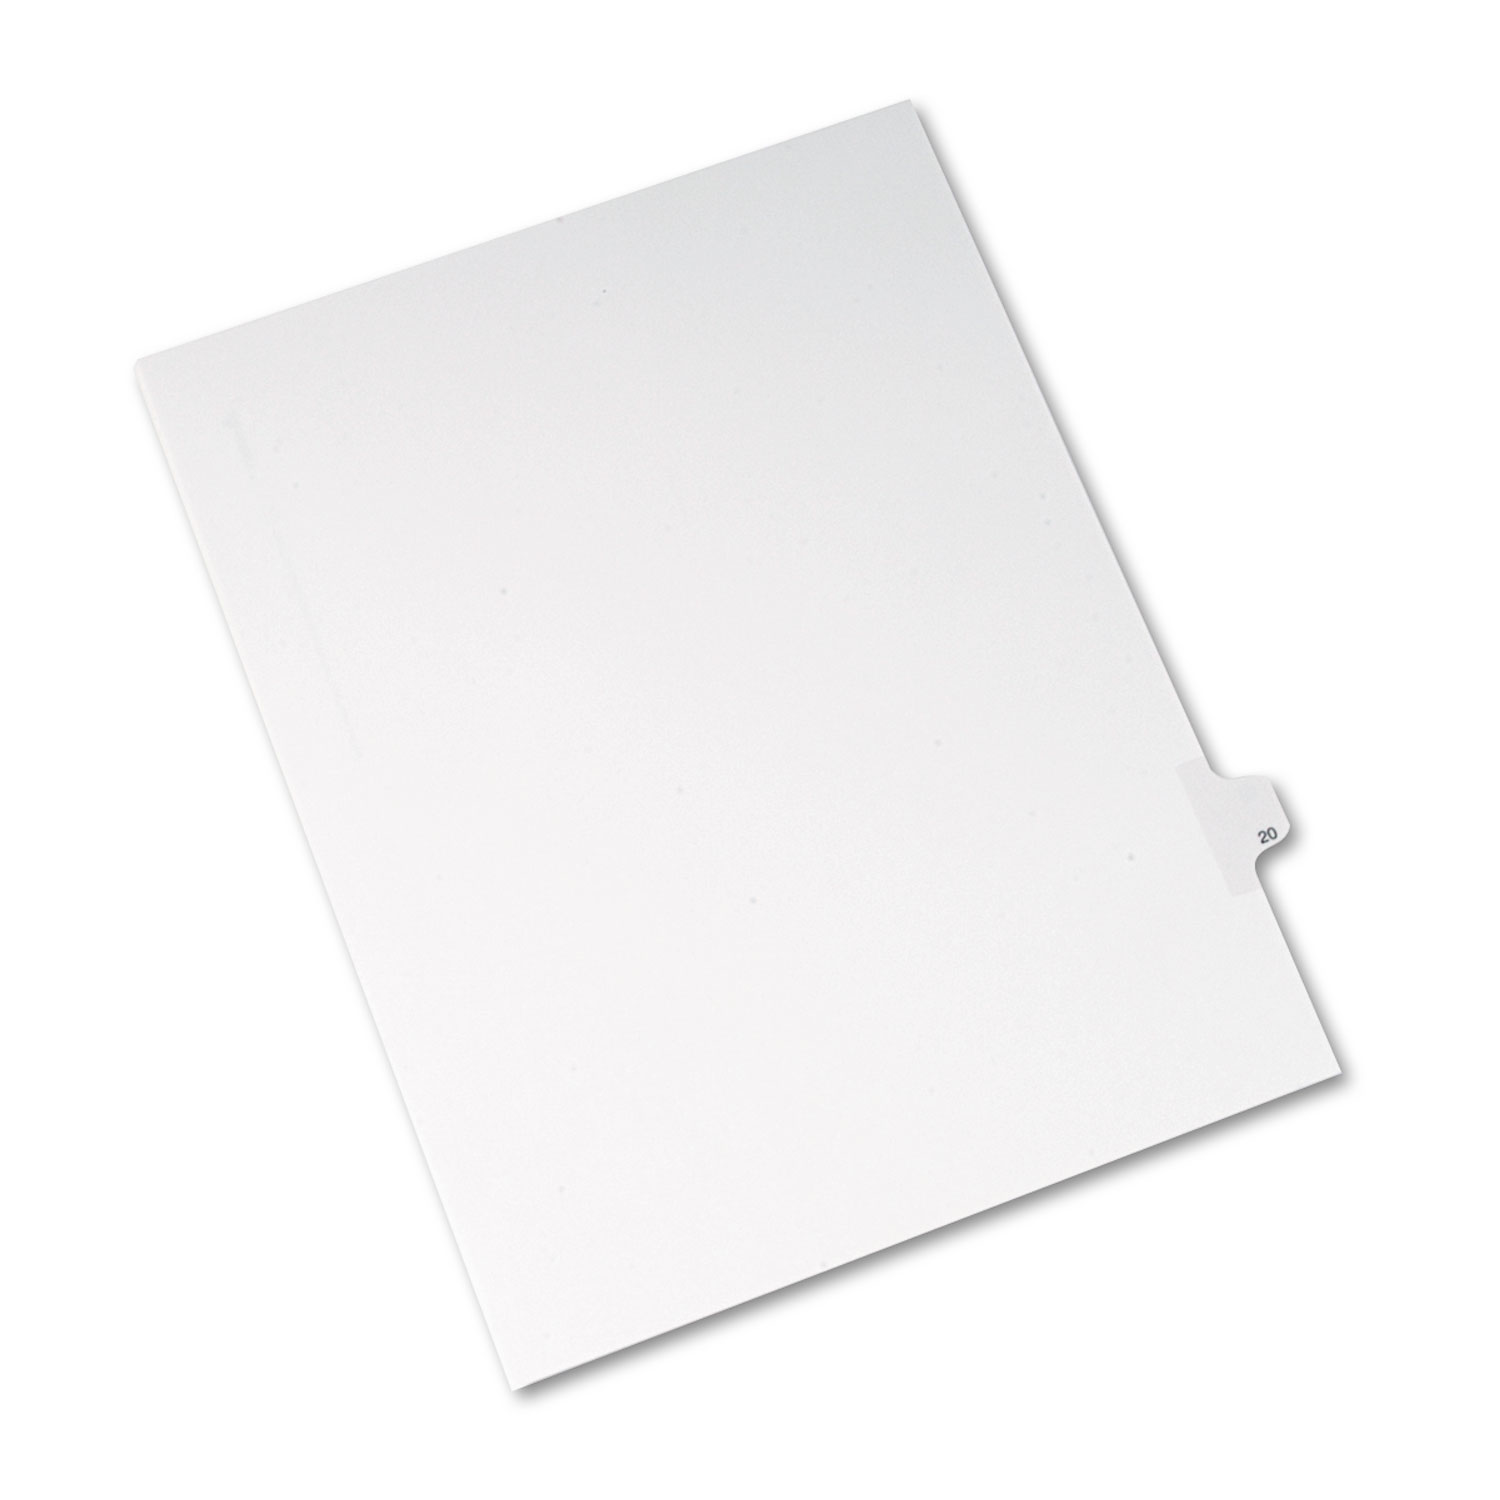  Avery 82218 Preprinted Legal Exhibit Side Tab Index Dividers, Allstate Style, 10-Tab, 20, 11 x 8.5, White, 25/Pack (AVE82218) 